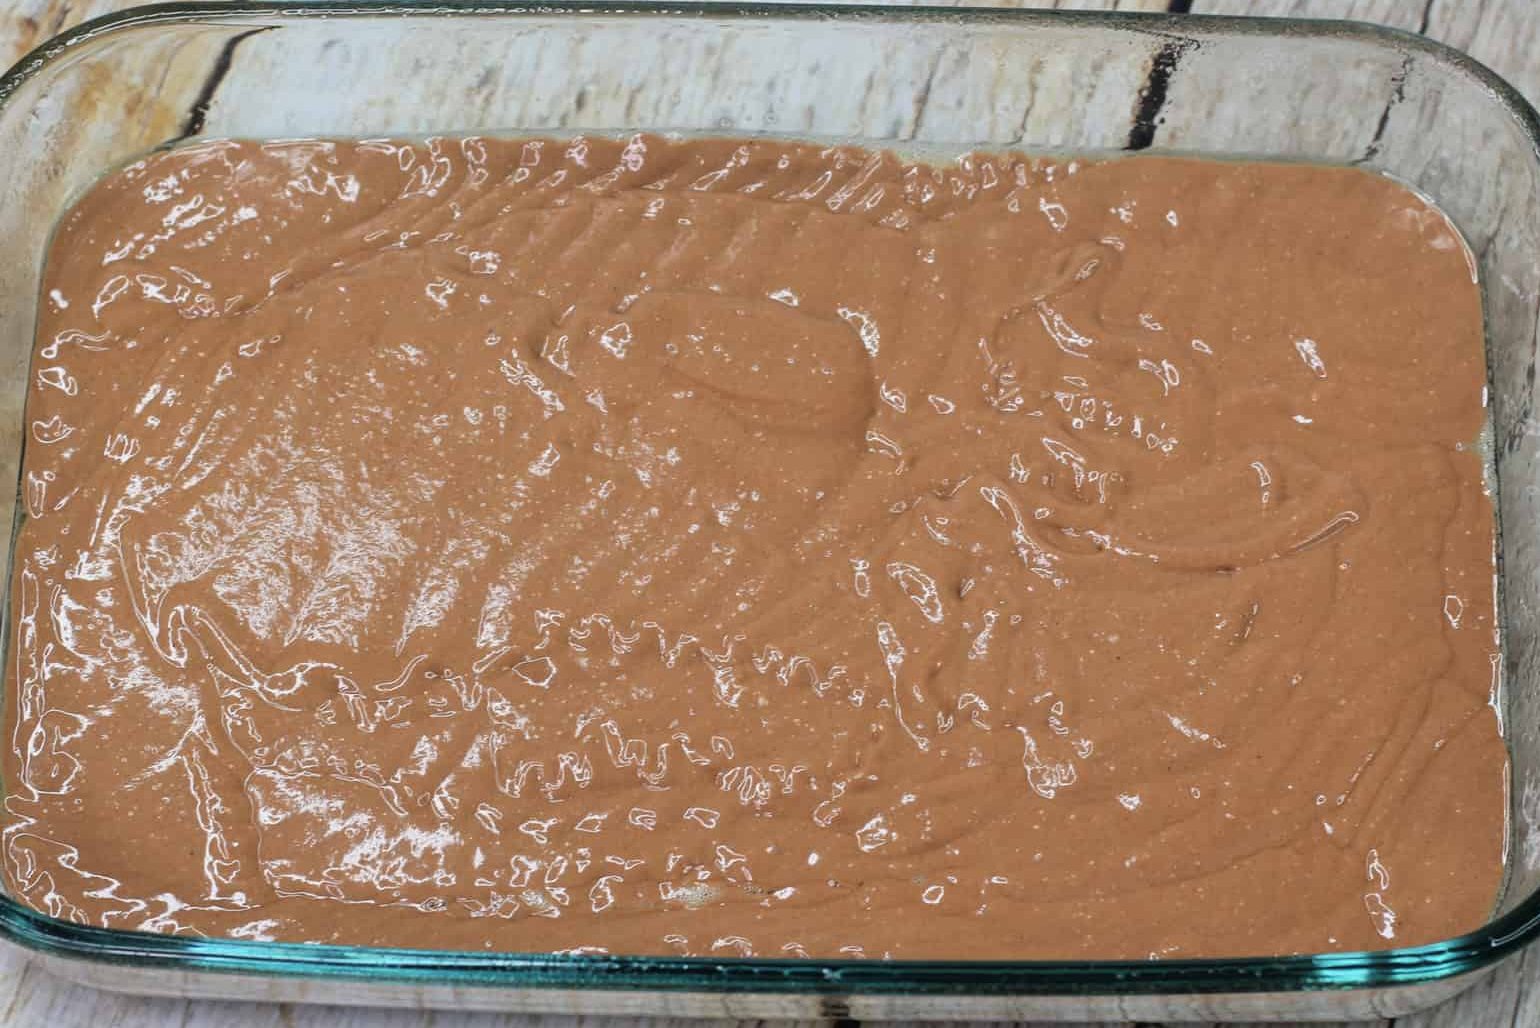 Pour half of the cake batter into the baking dish 